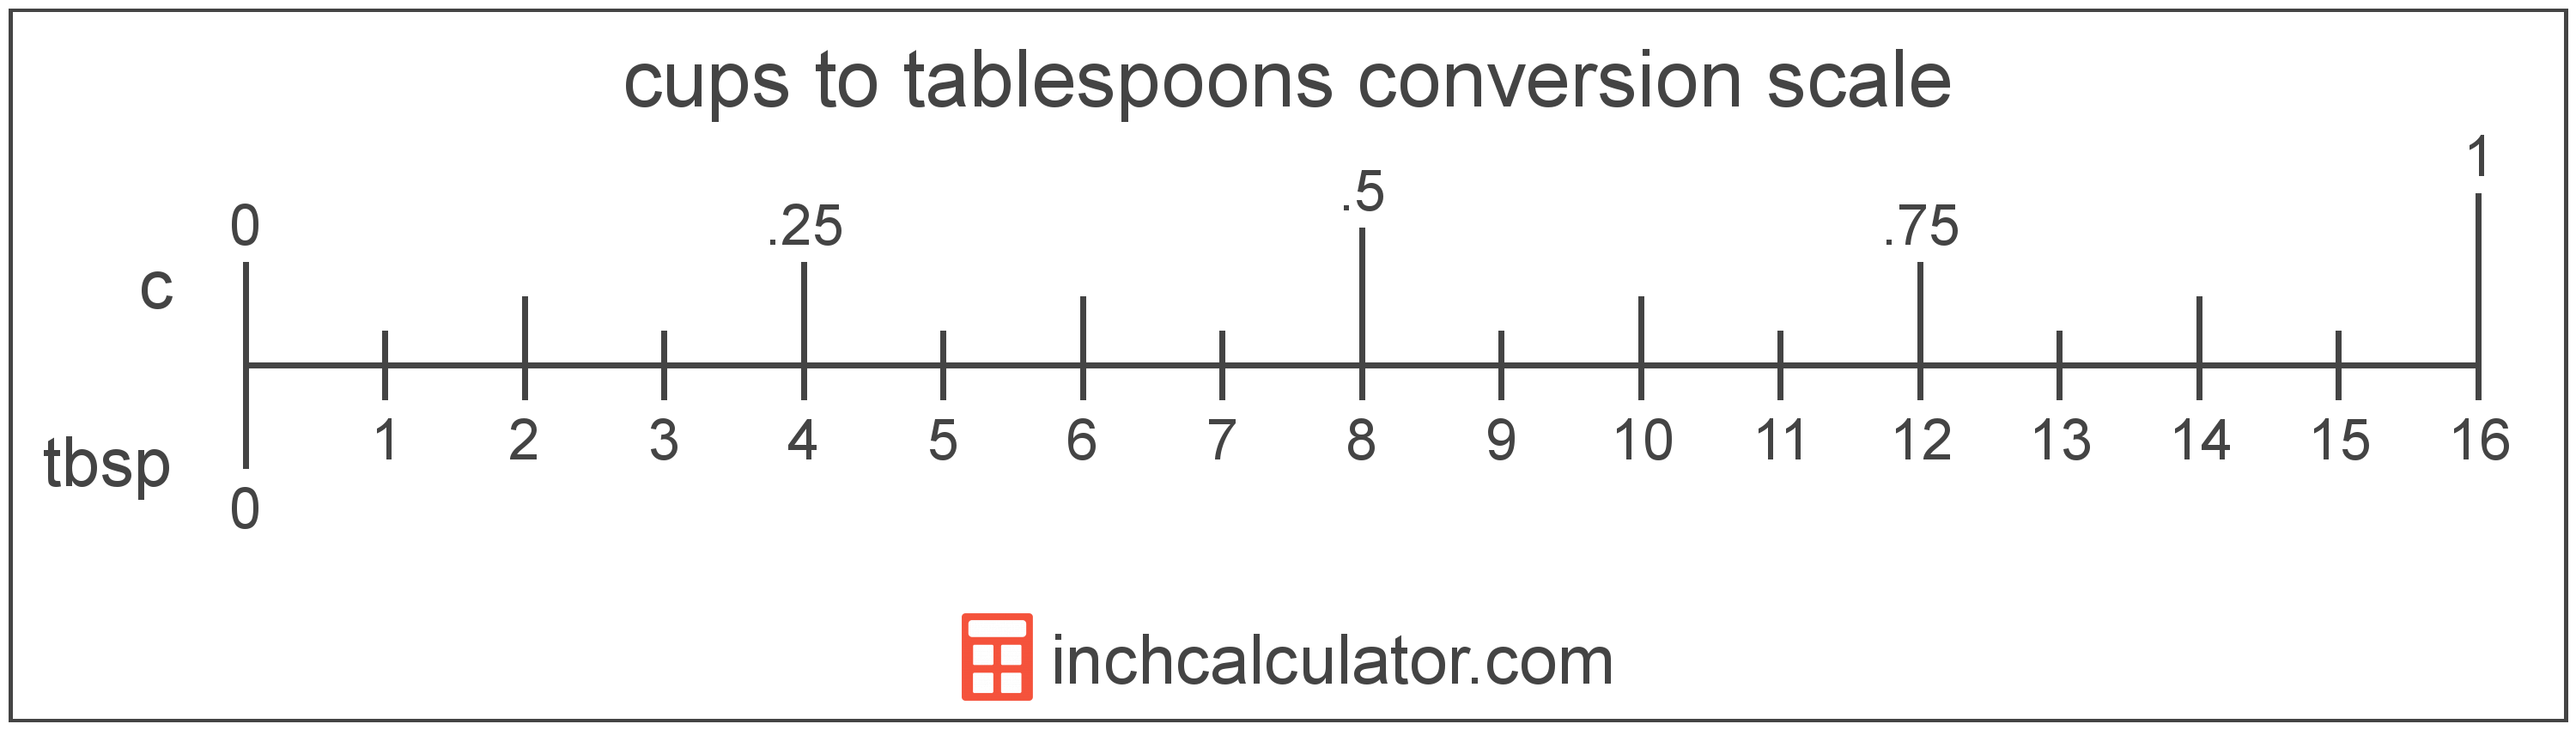 conversion scale showing tablespoons and equivalent cups volume values